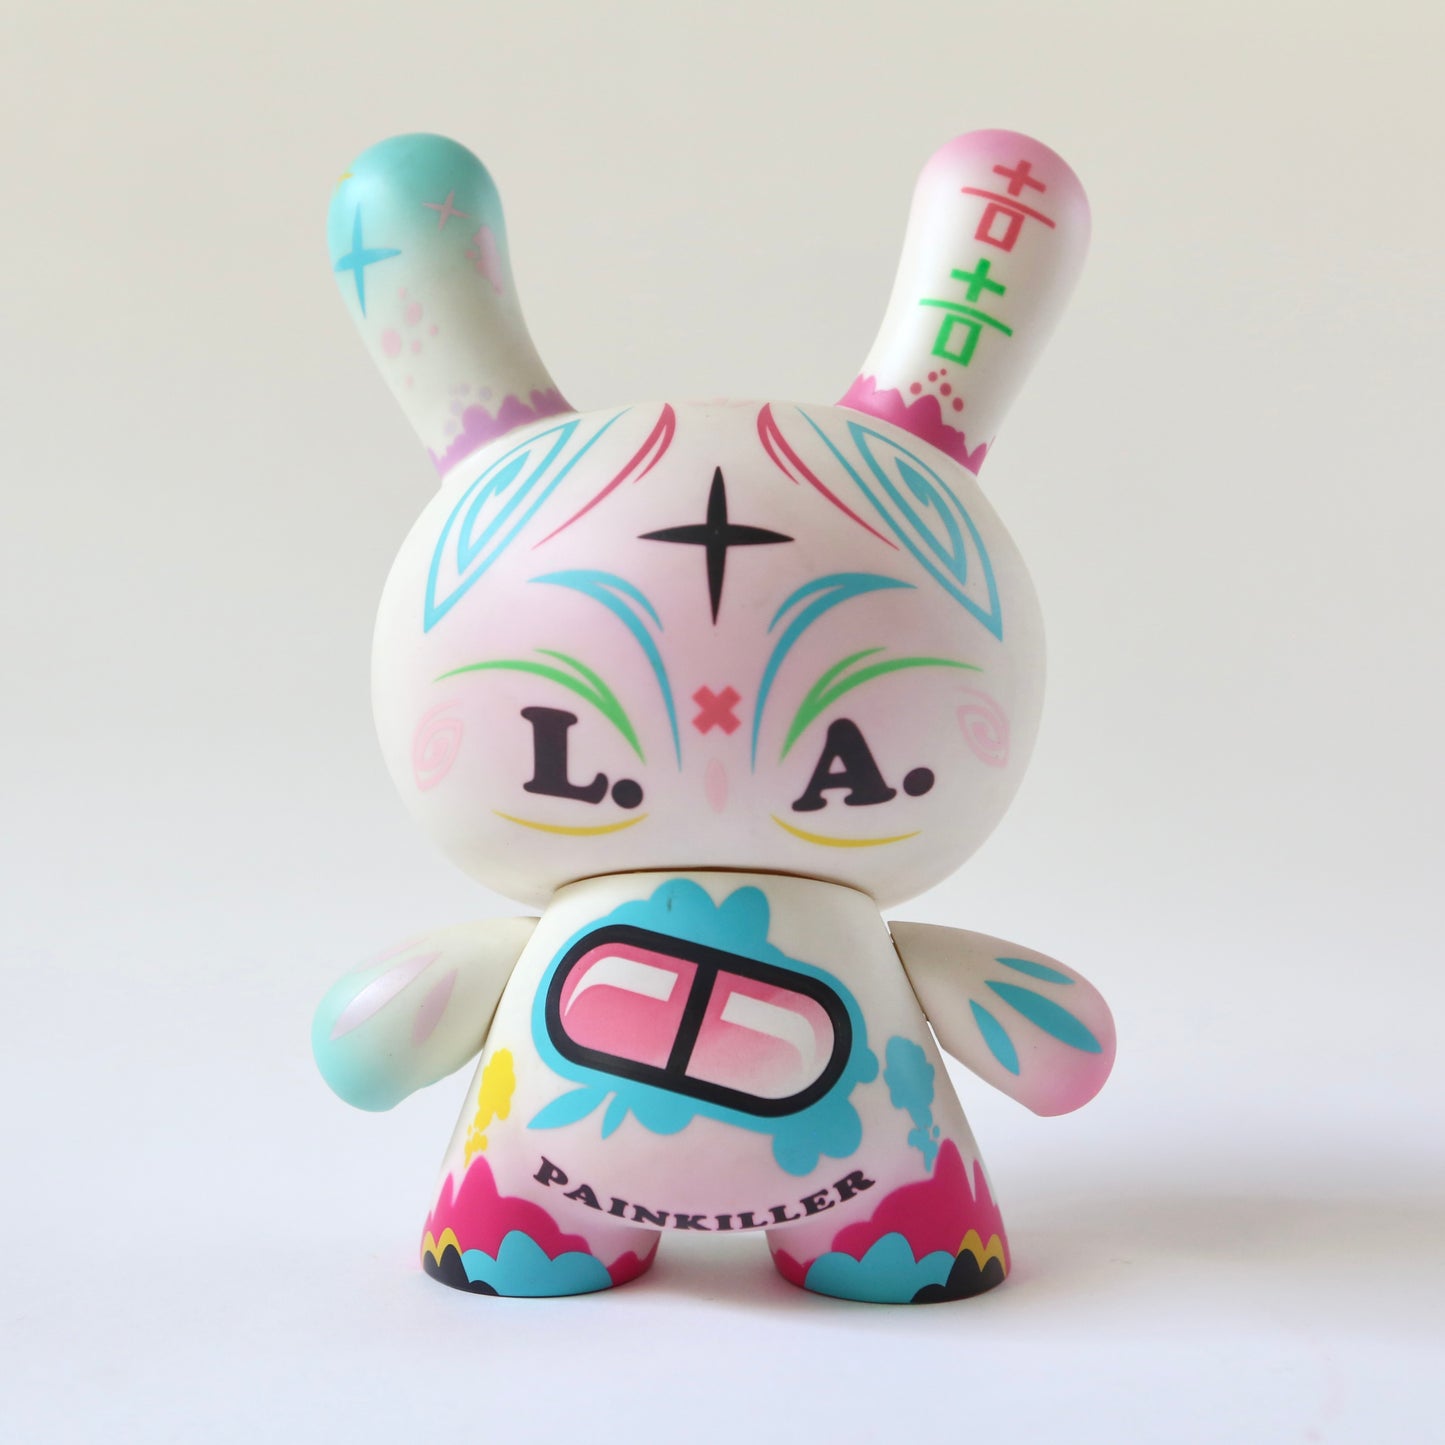 "Painkiller" 8in Dunny by Thomas Han x Kidrobot